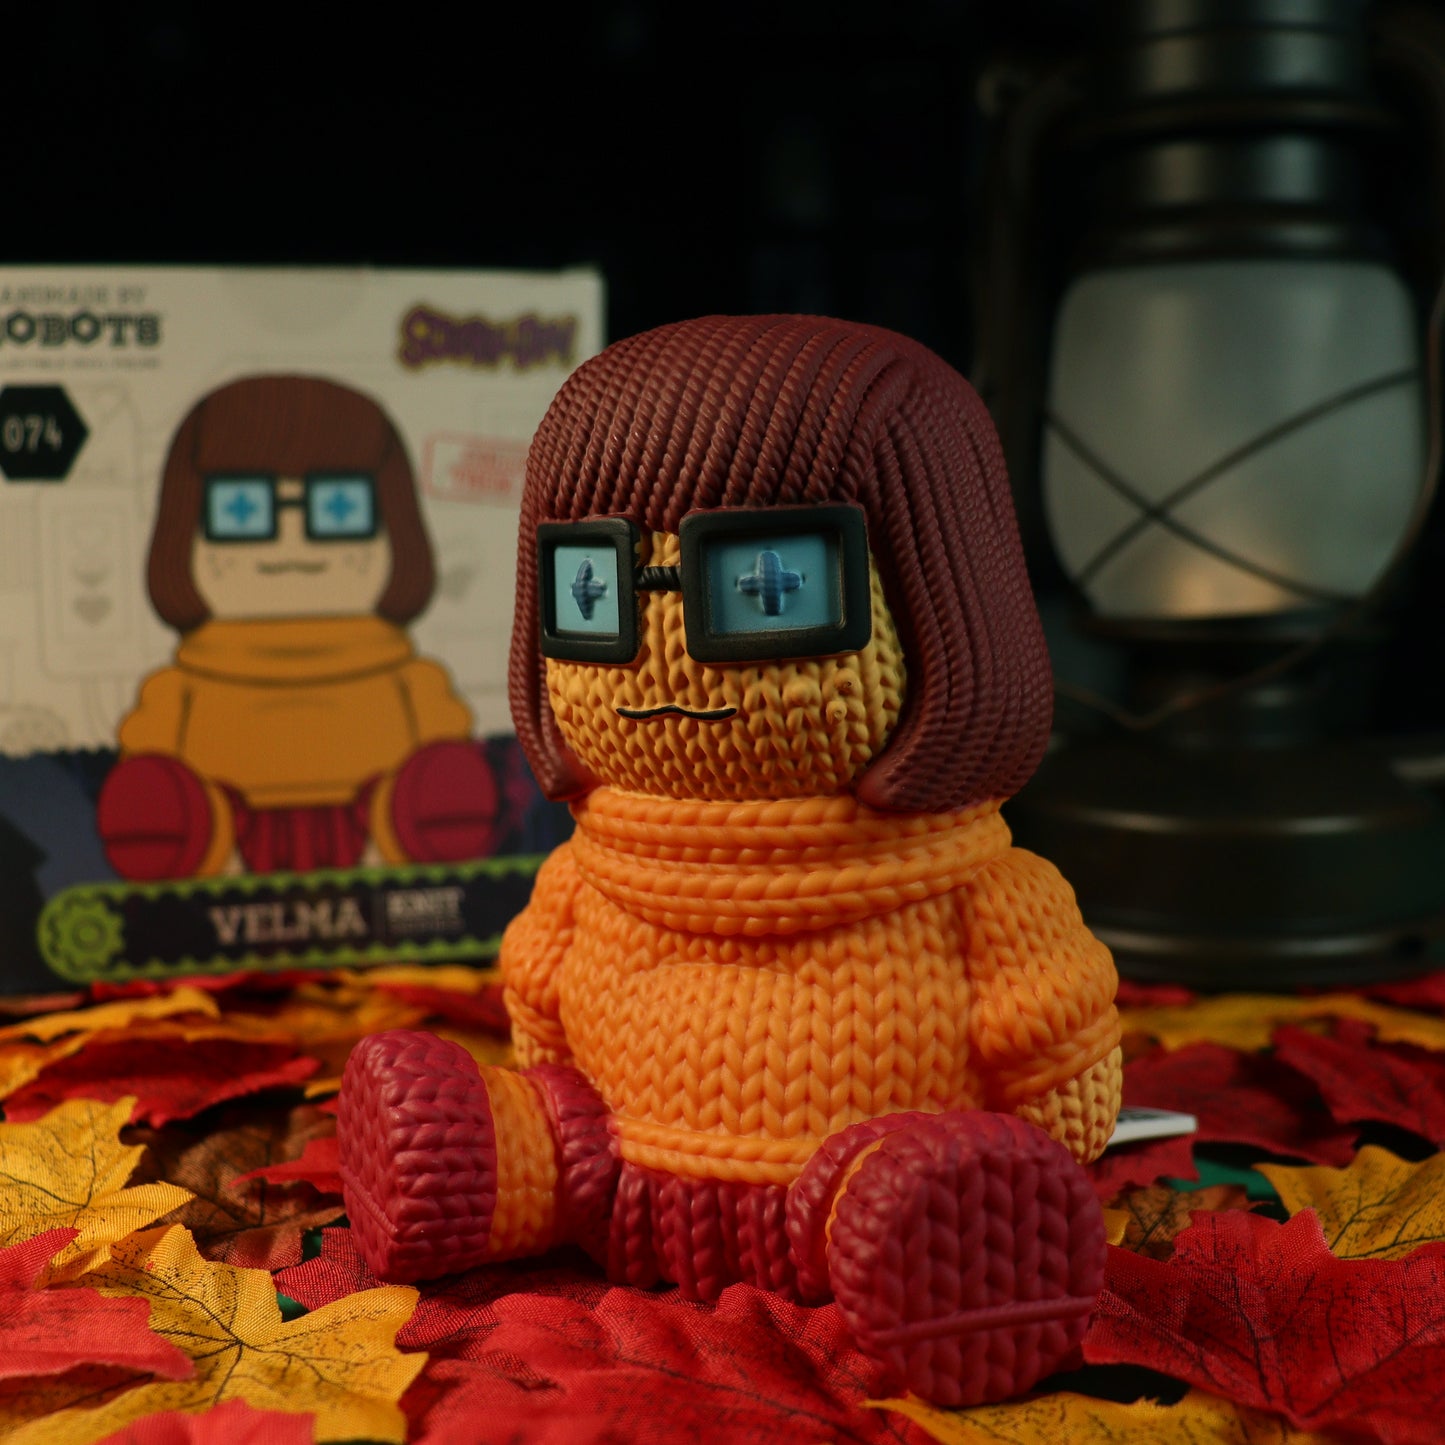 Scooby-Doo - Velma Collectible Vinyl Figure from Handmade By Robots